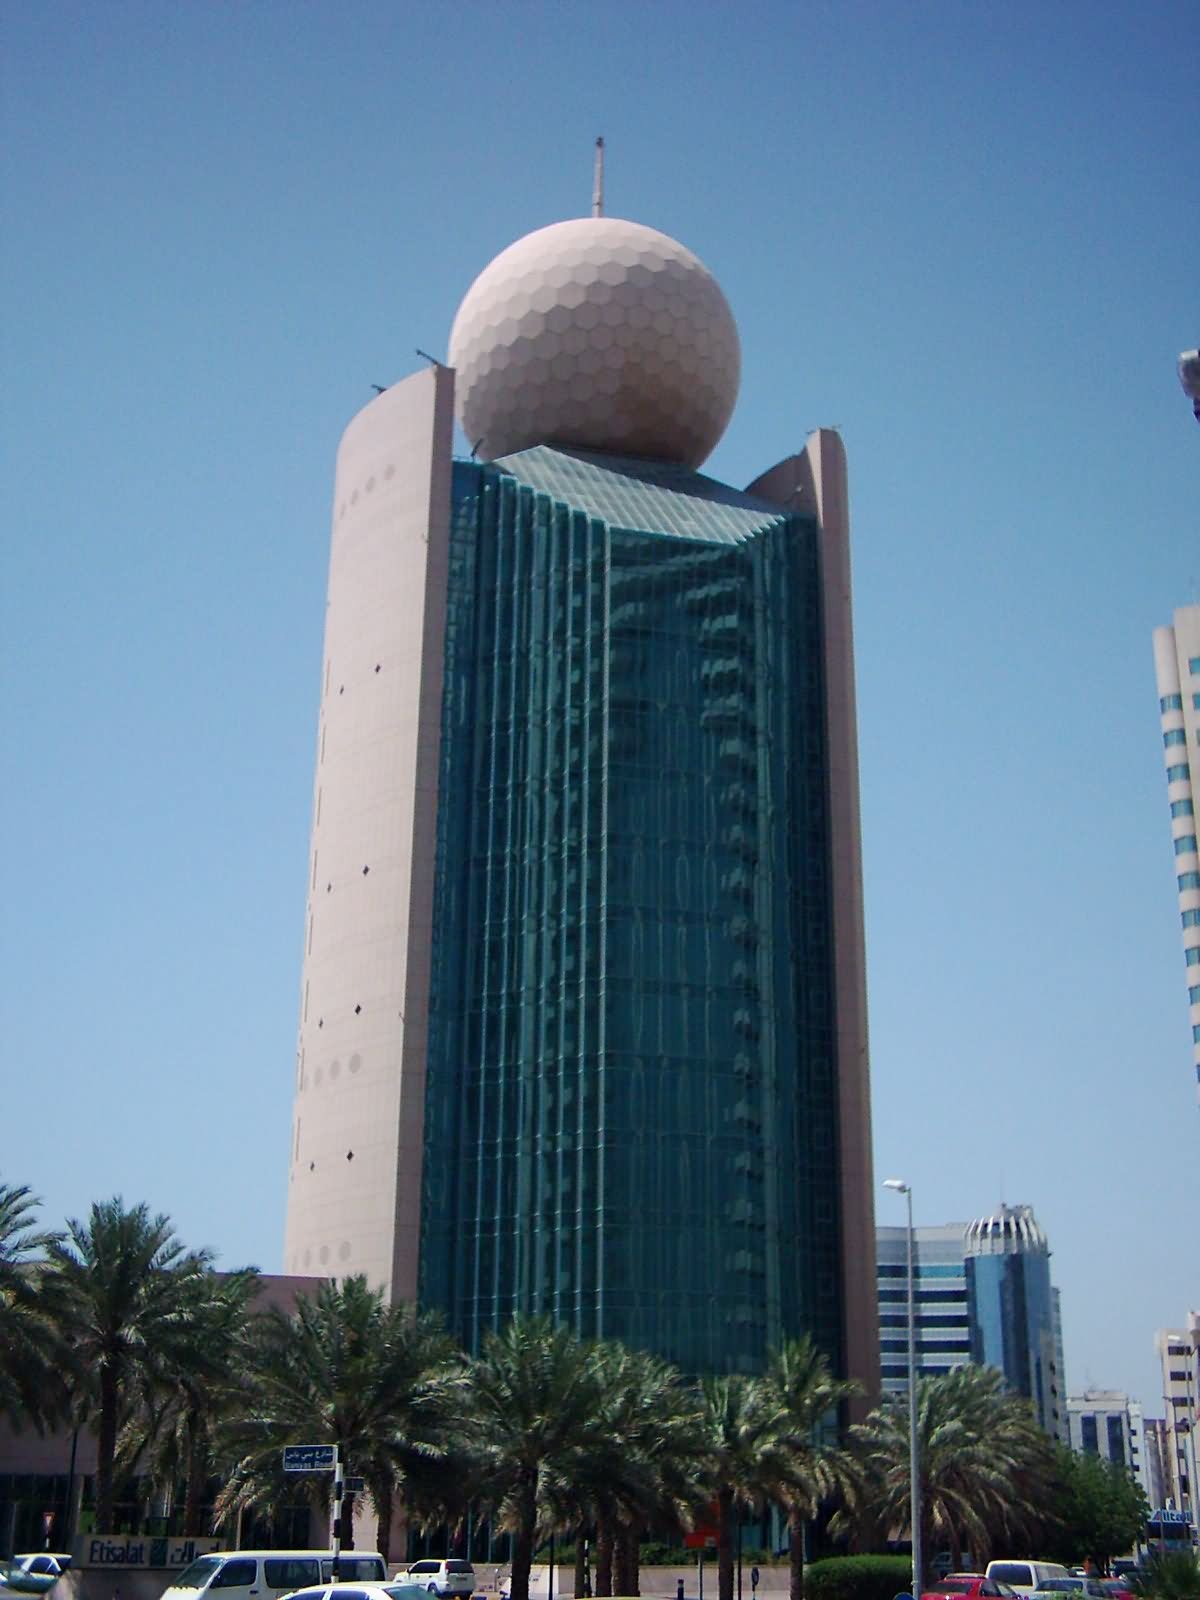 30 Most Amazing Pictures And Images Of Etisalat Tower